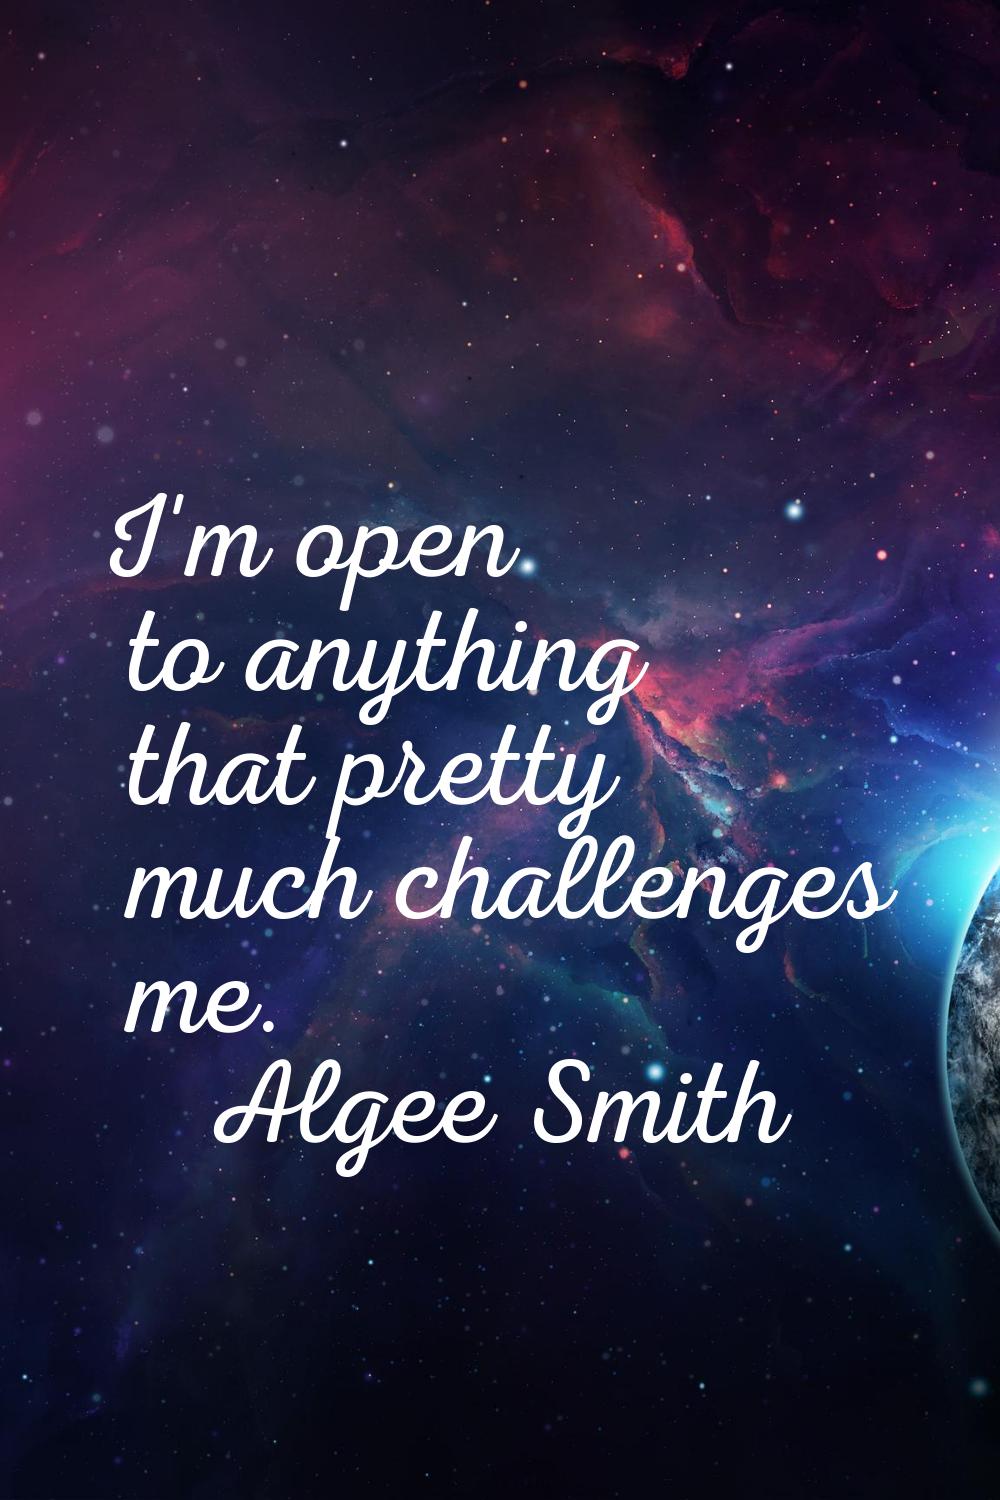 I'm open to anything that pretty much challenges me.